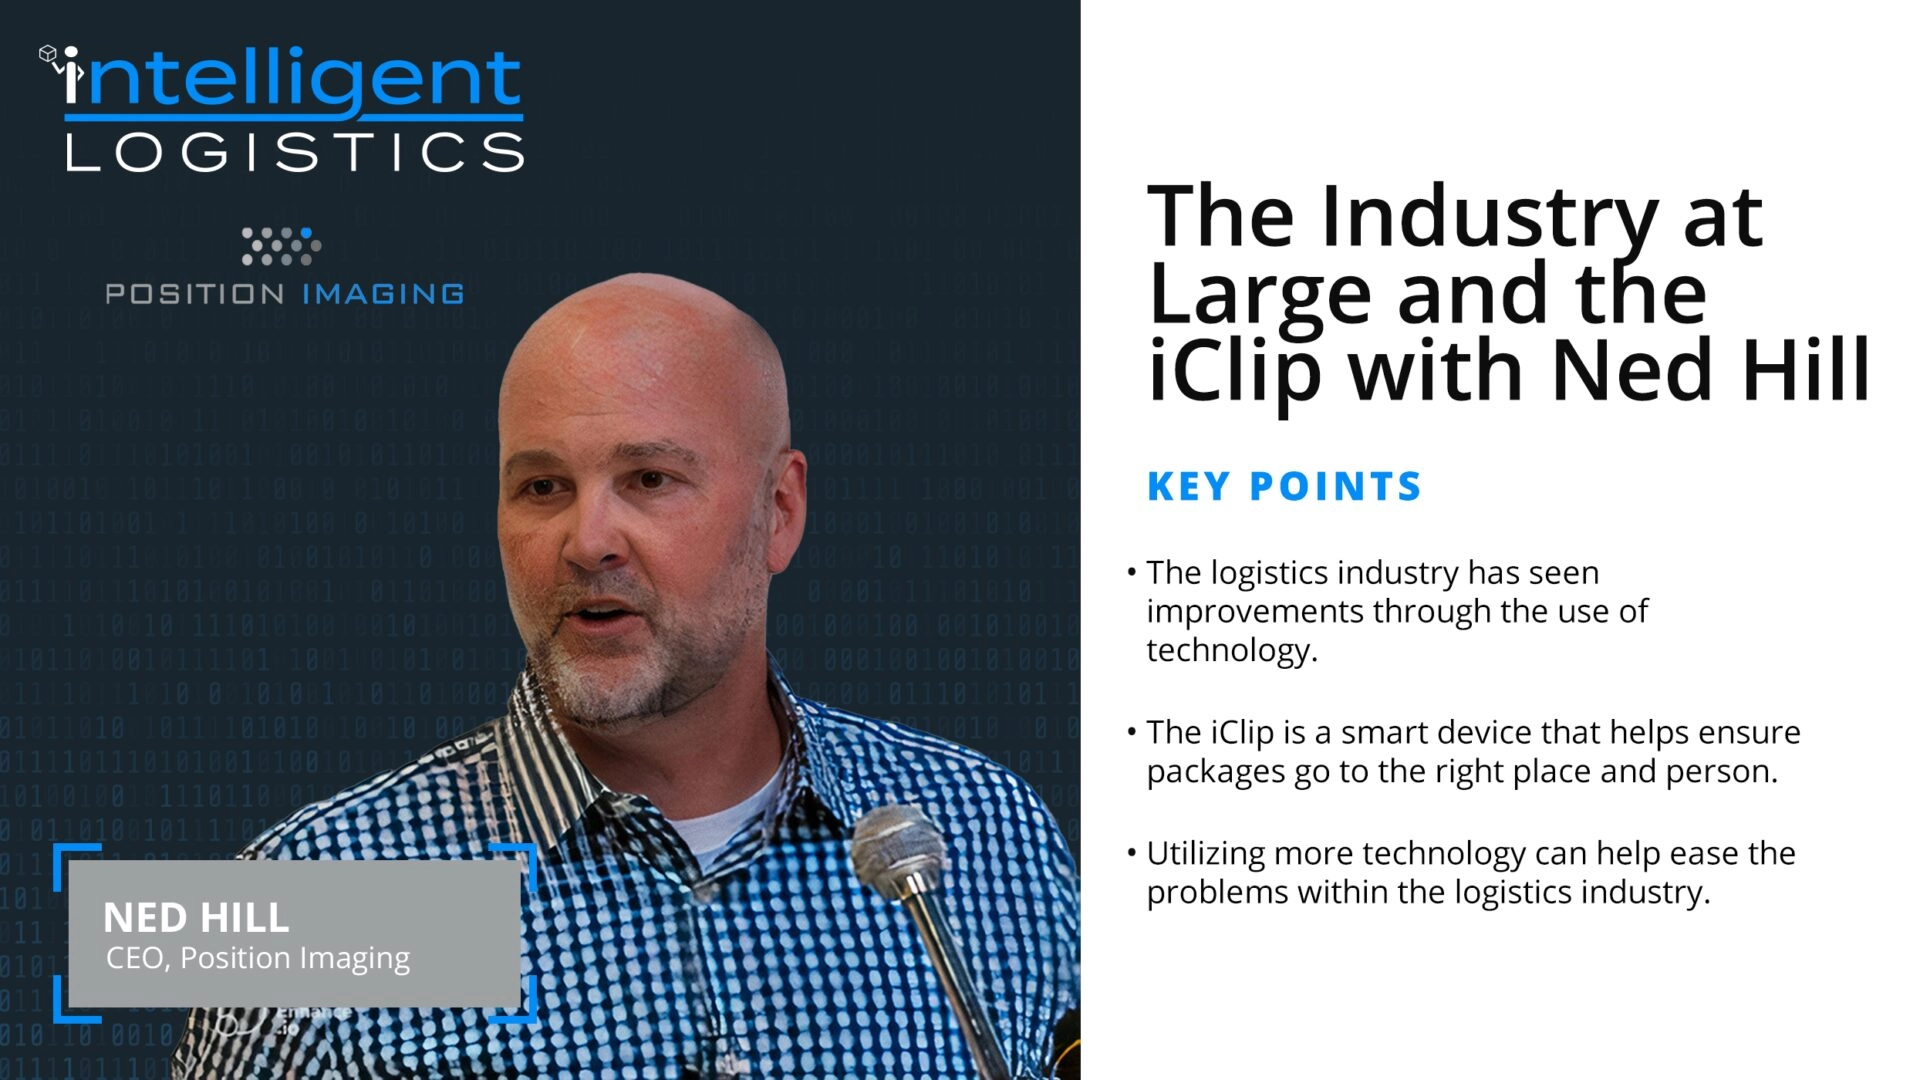 Intelligent Logistics: The Industry at Large and the iClip